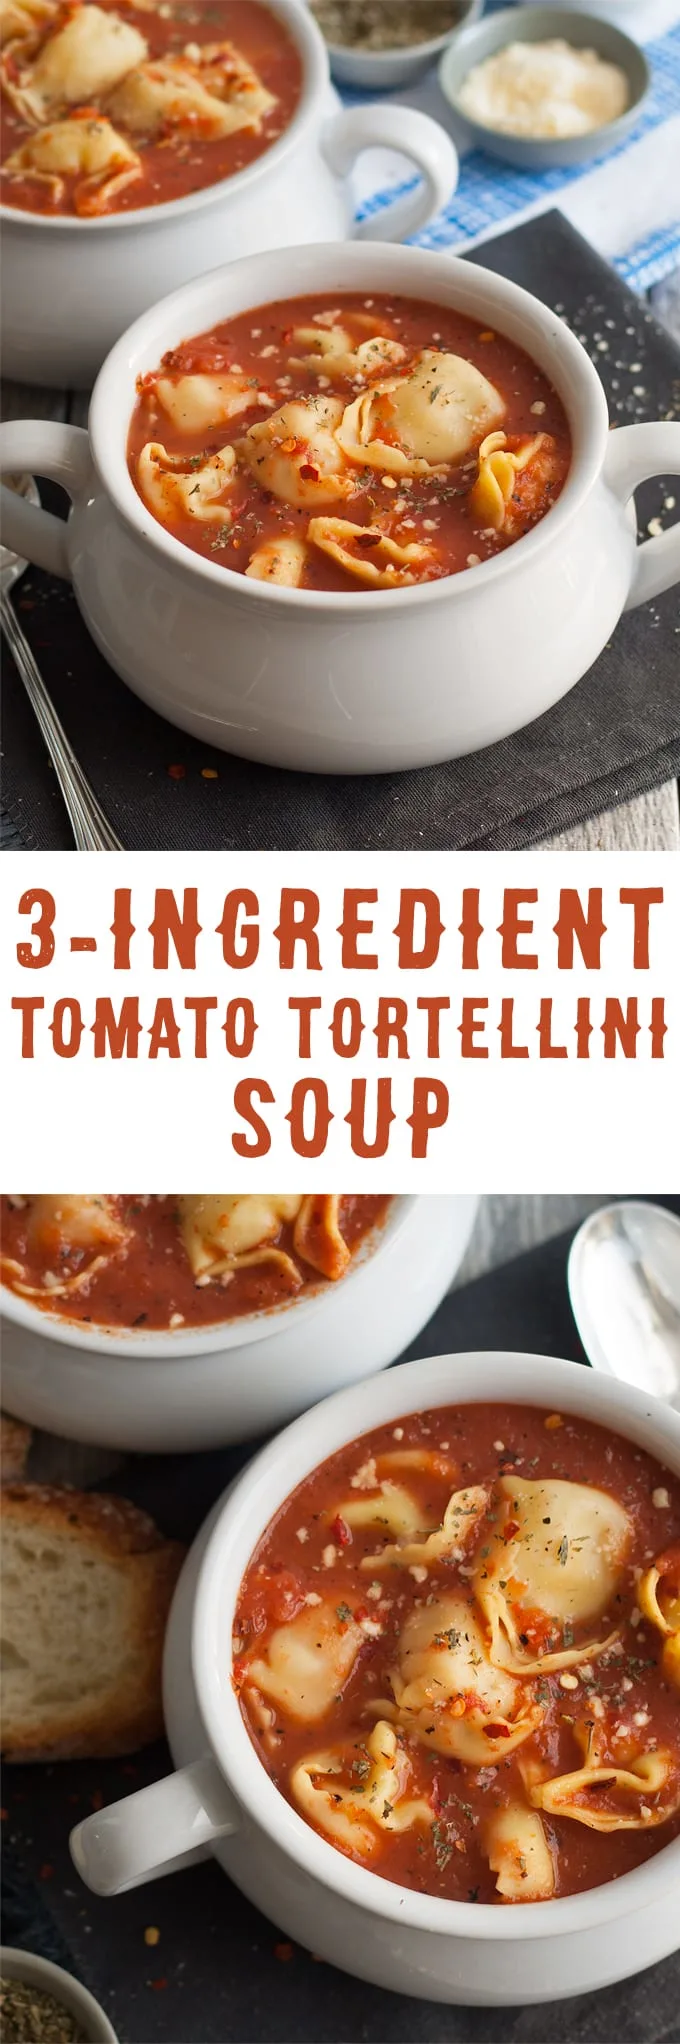 3 Ingredient Tomato Tortellini Soup - if you're short on time, make this soup! It only takes 15 minutes from start to finish and is full of flavor. Plus, 3 variations are included with easy additions for more soup deliciousness! | honeyandbirch.com